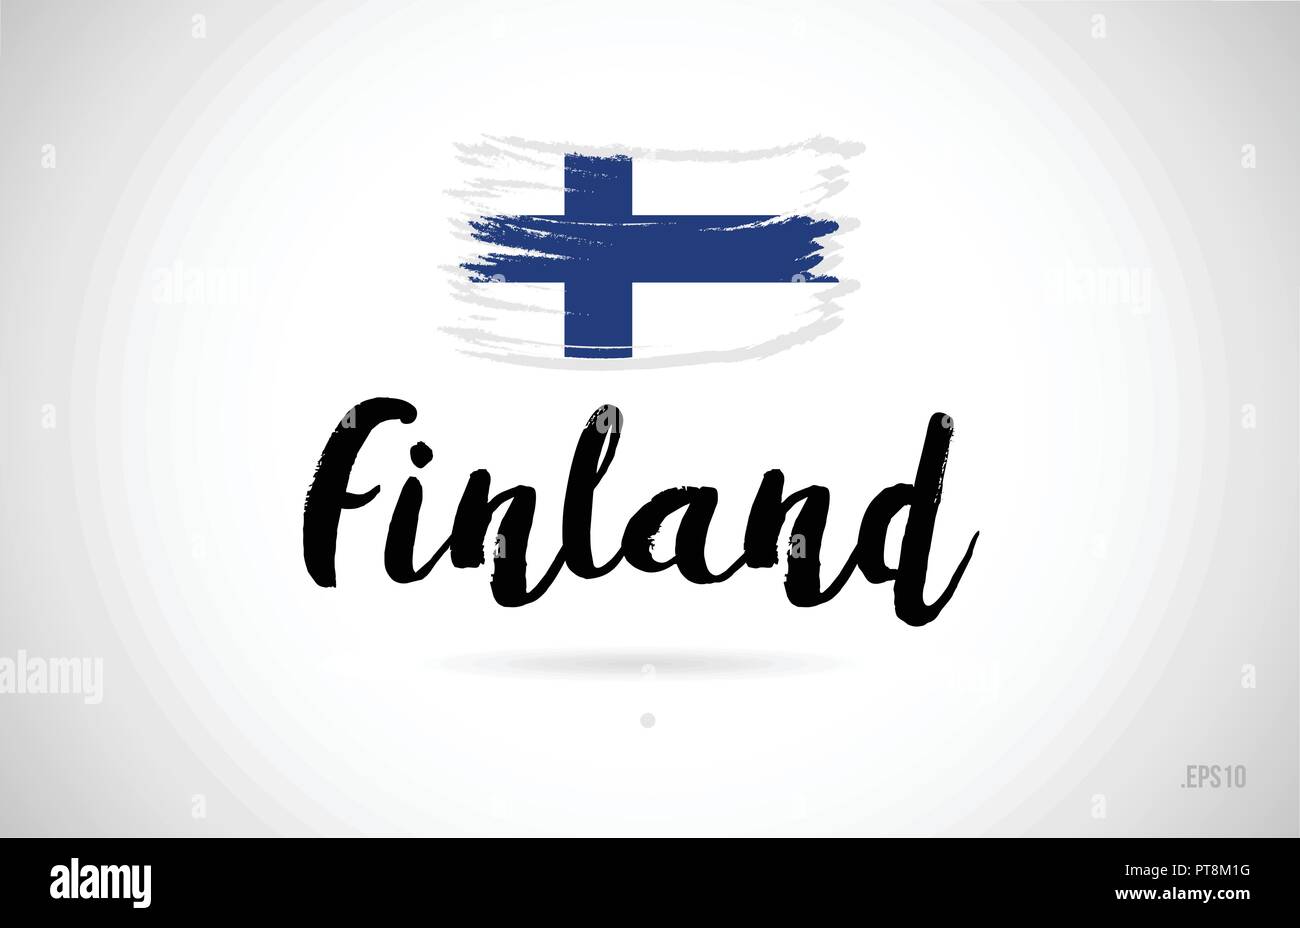 finland country flag concept with grunge design suitable for a logo icon design Stock Vector